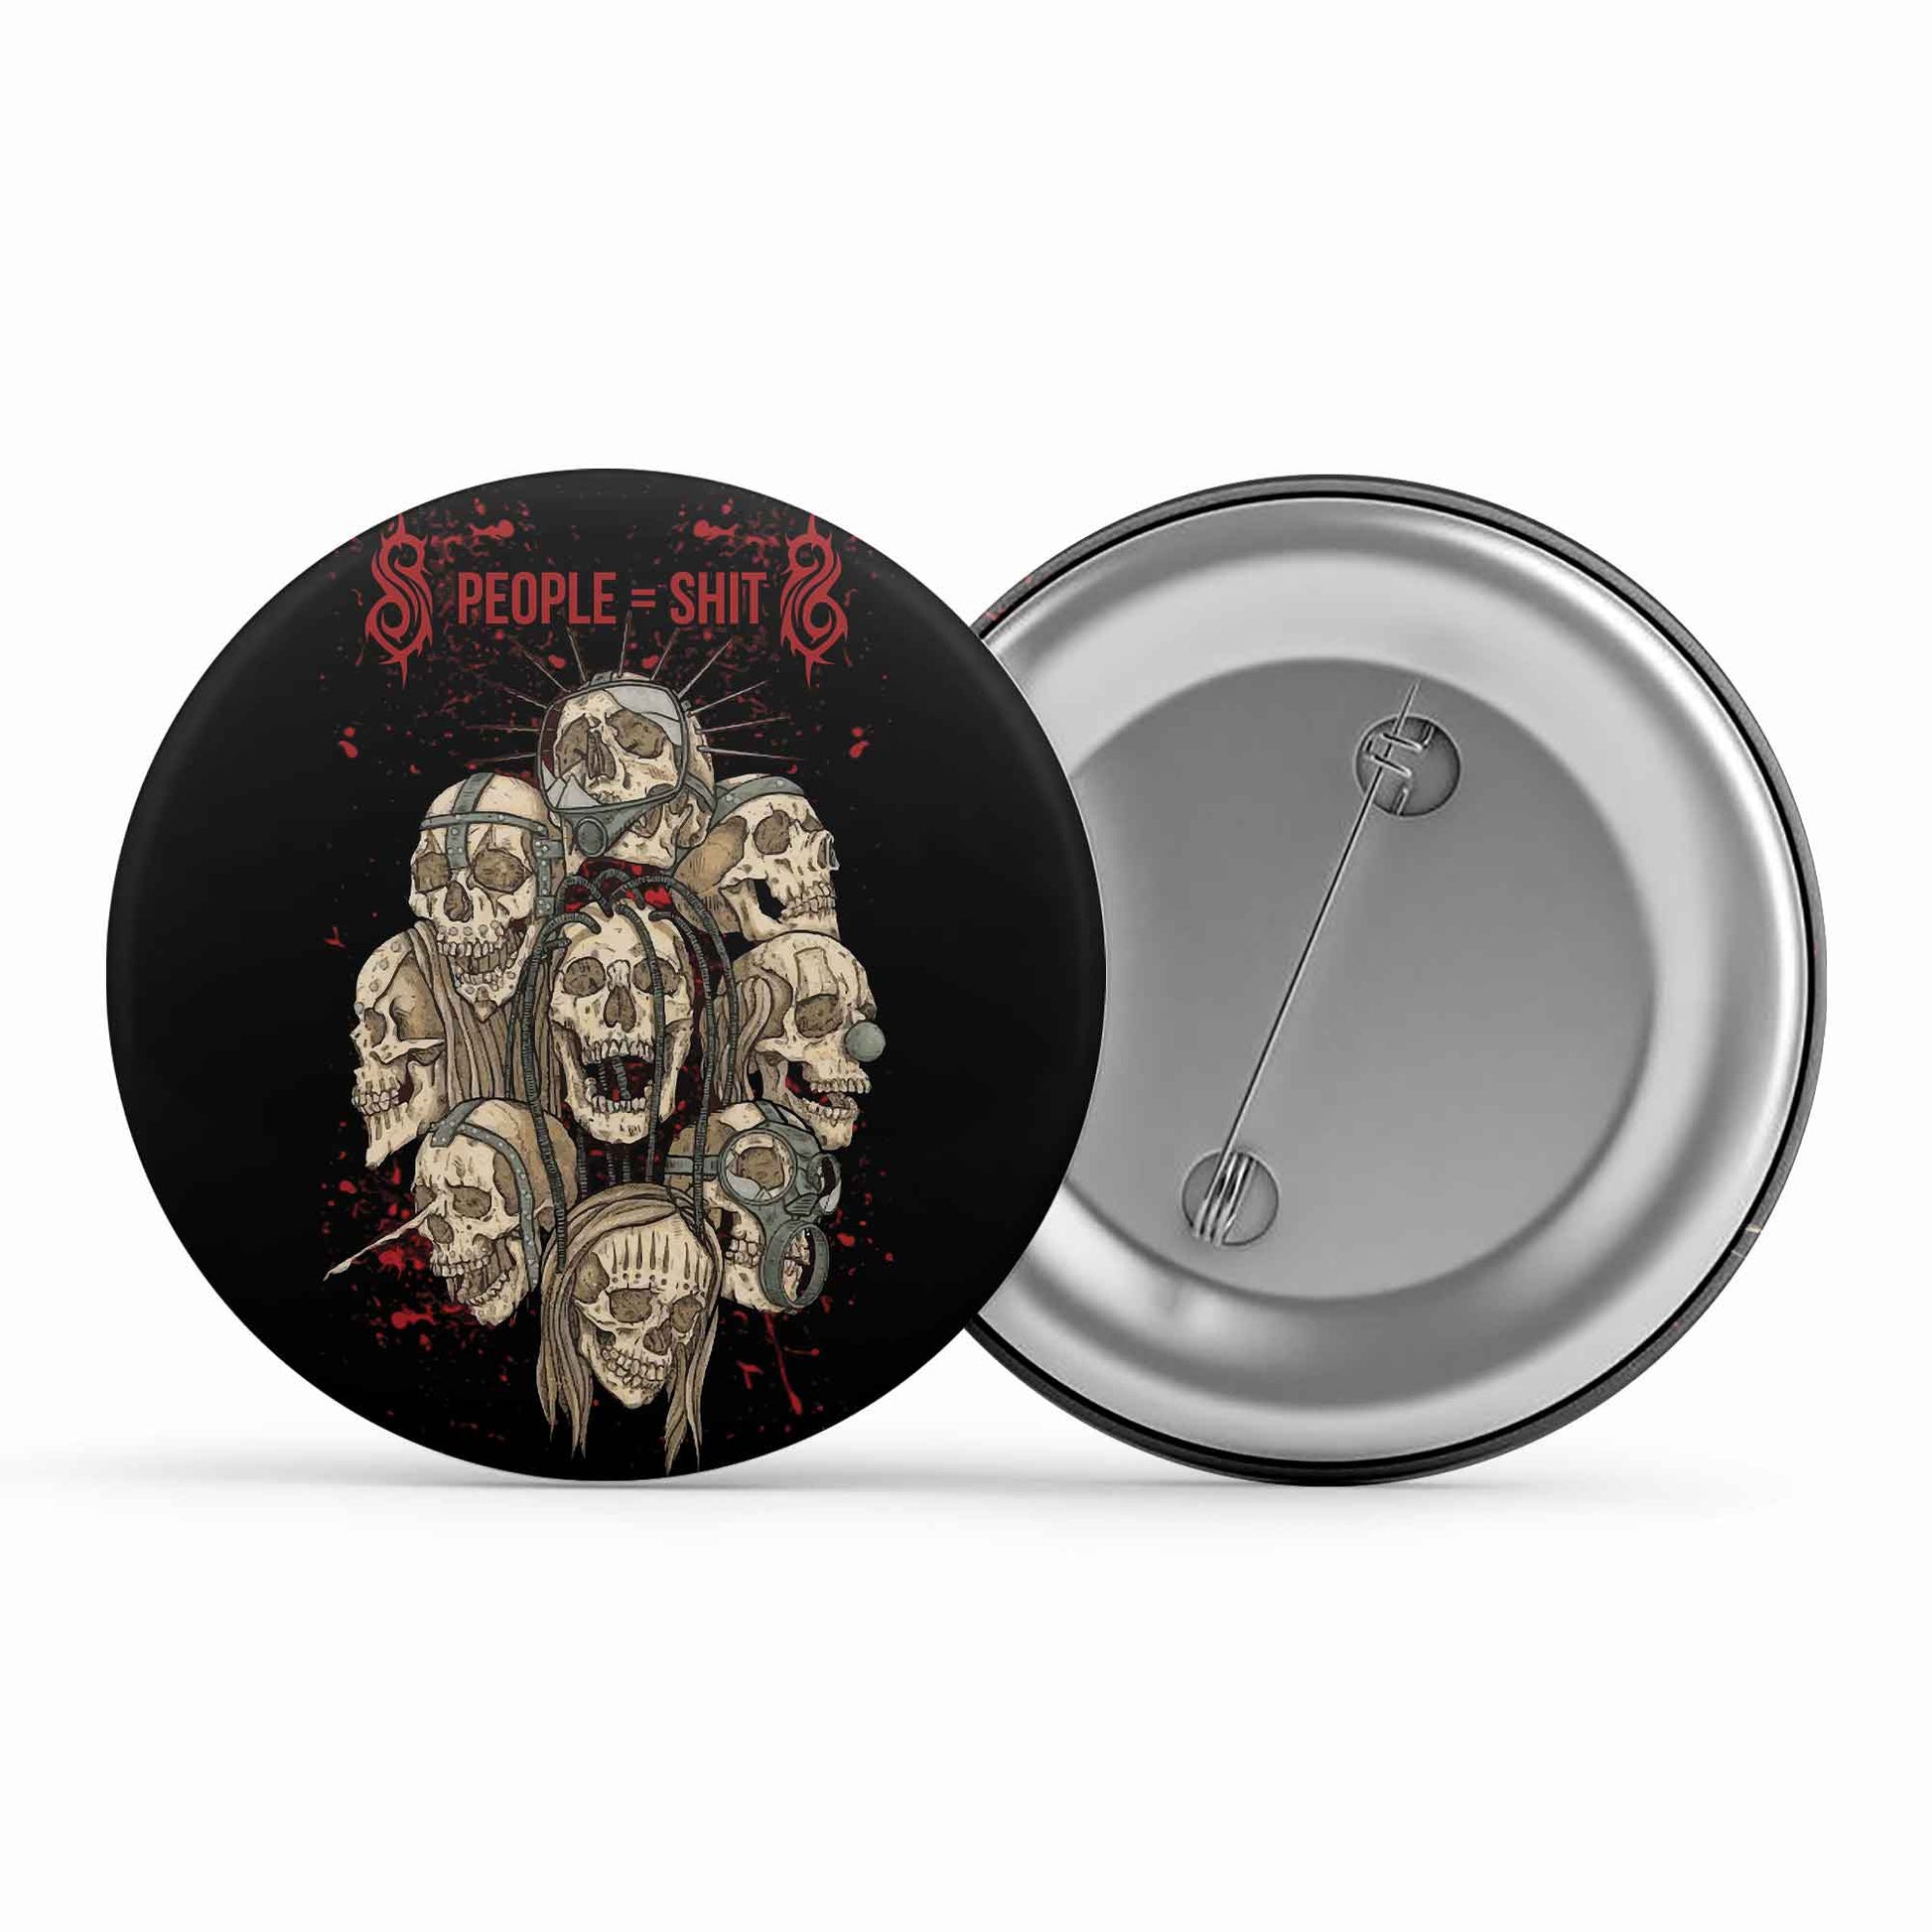 slipknot people equal to shit badge pin button music band buy online united states of america usa the banyan tee tbt men women girls boys unisex